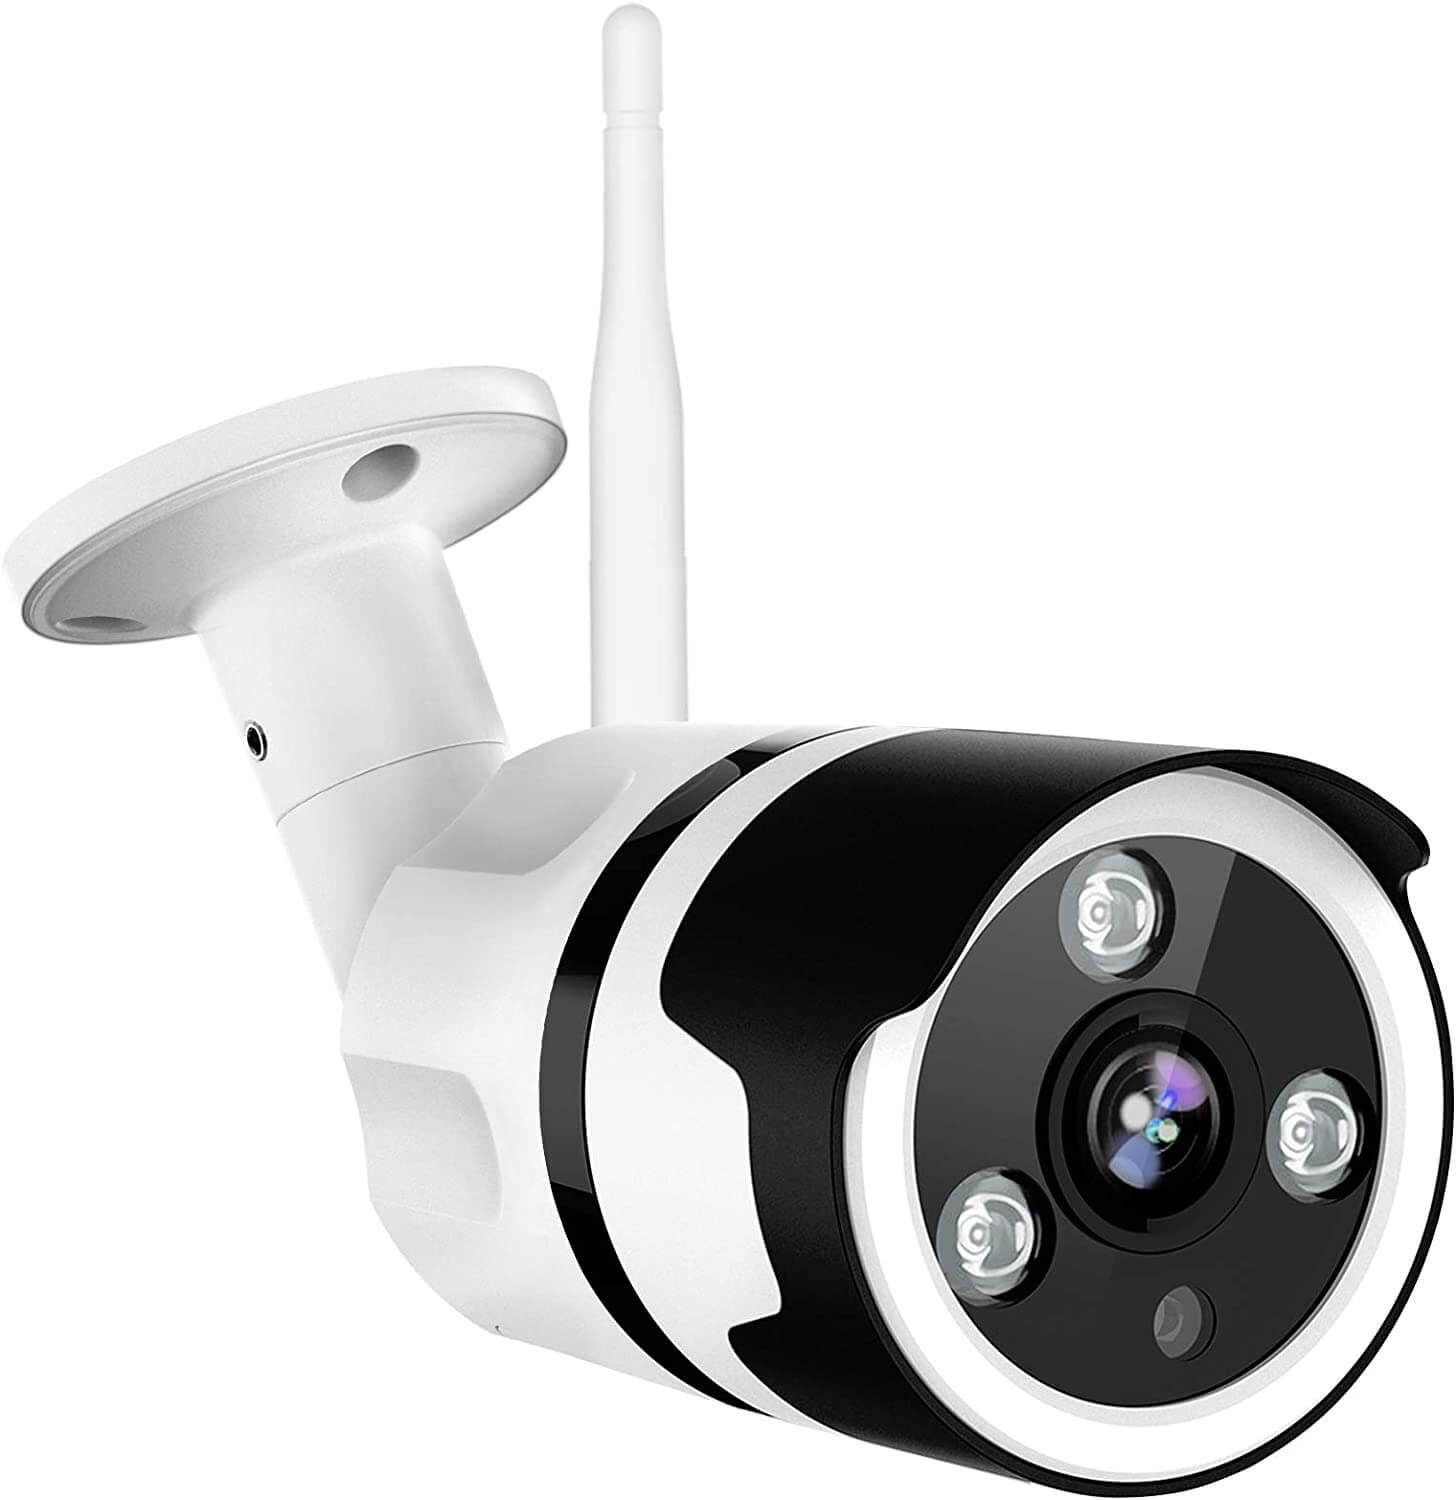 Best-Wireless-Security-Camera-Systems-for-Home-Netvue-Bullet-Security-Camera